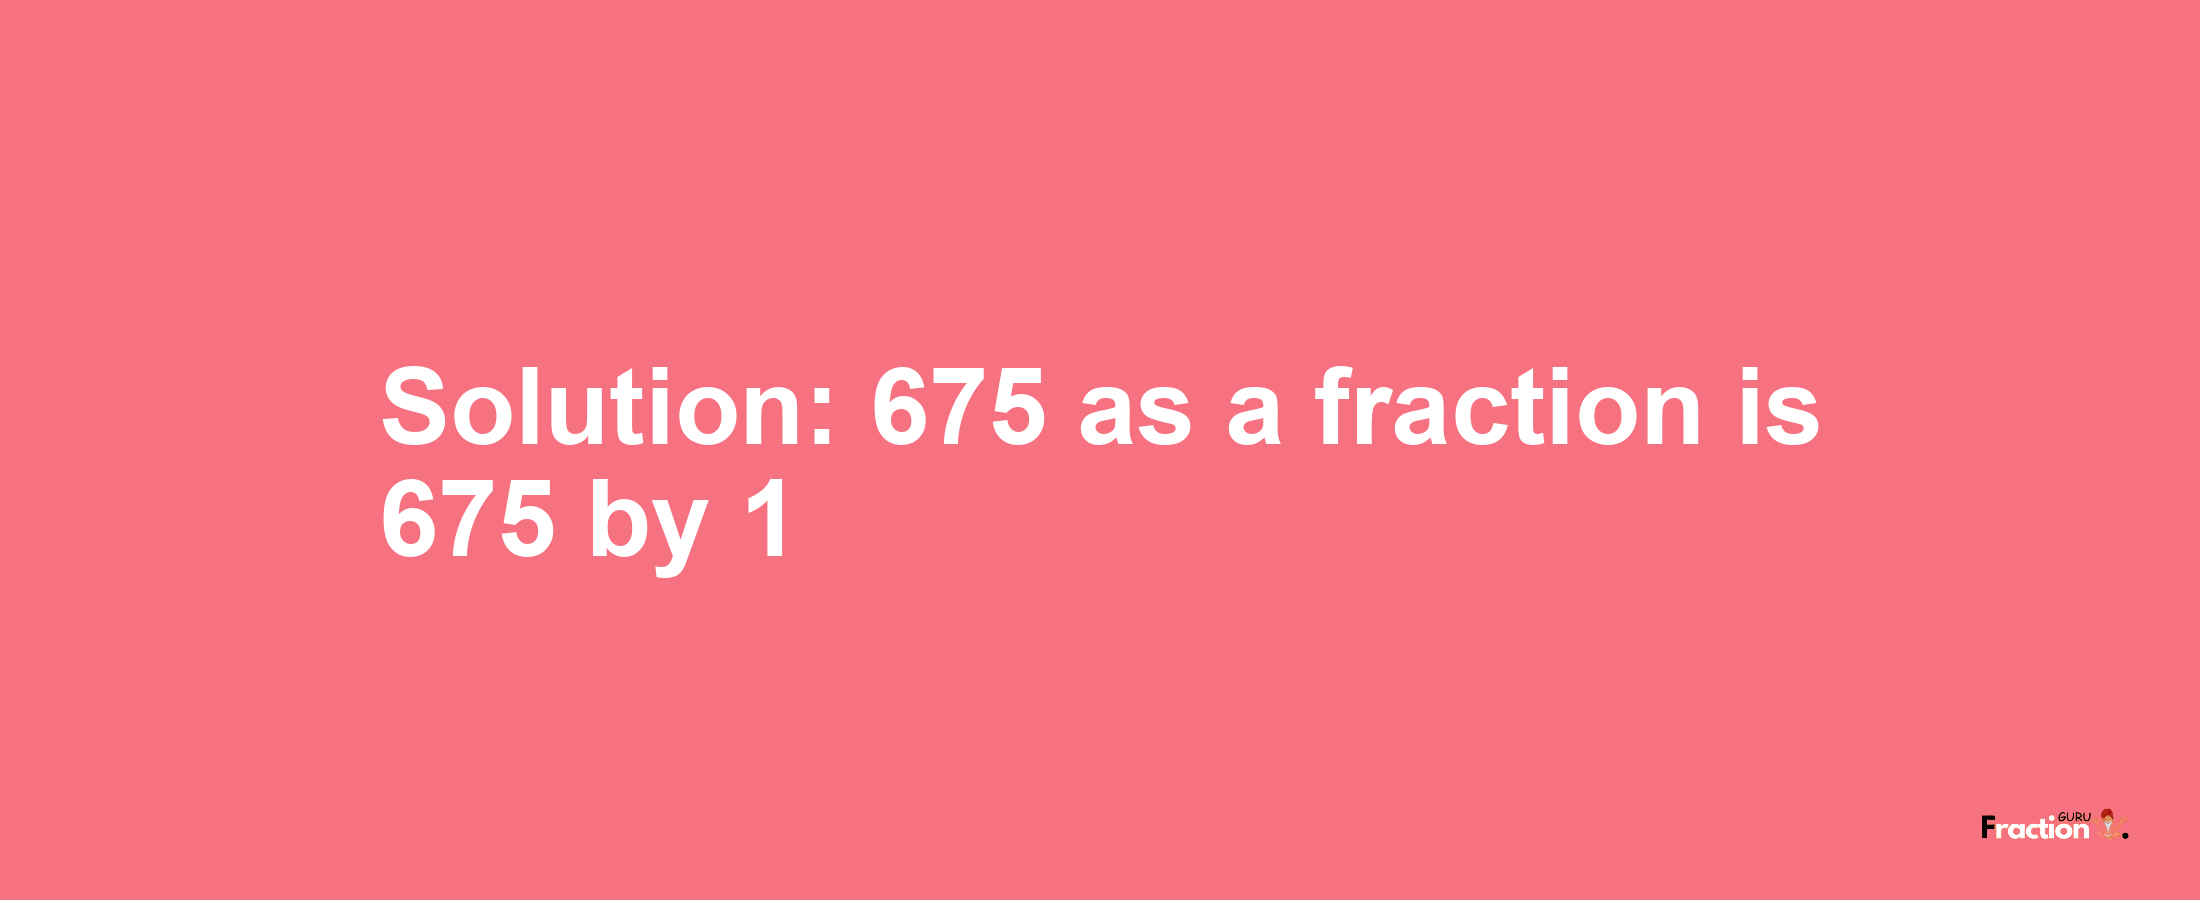 Solution:675 as a fraction is 675/1